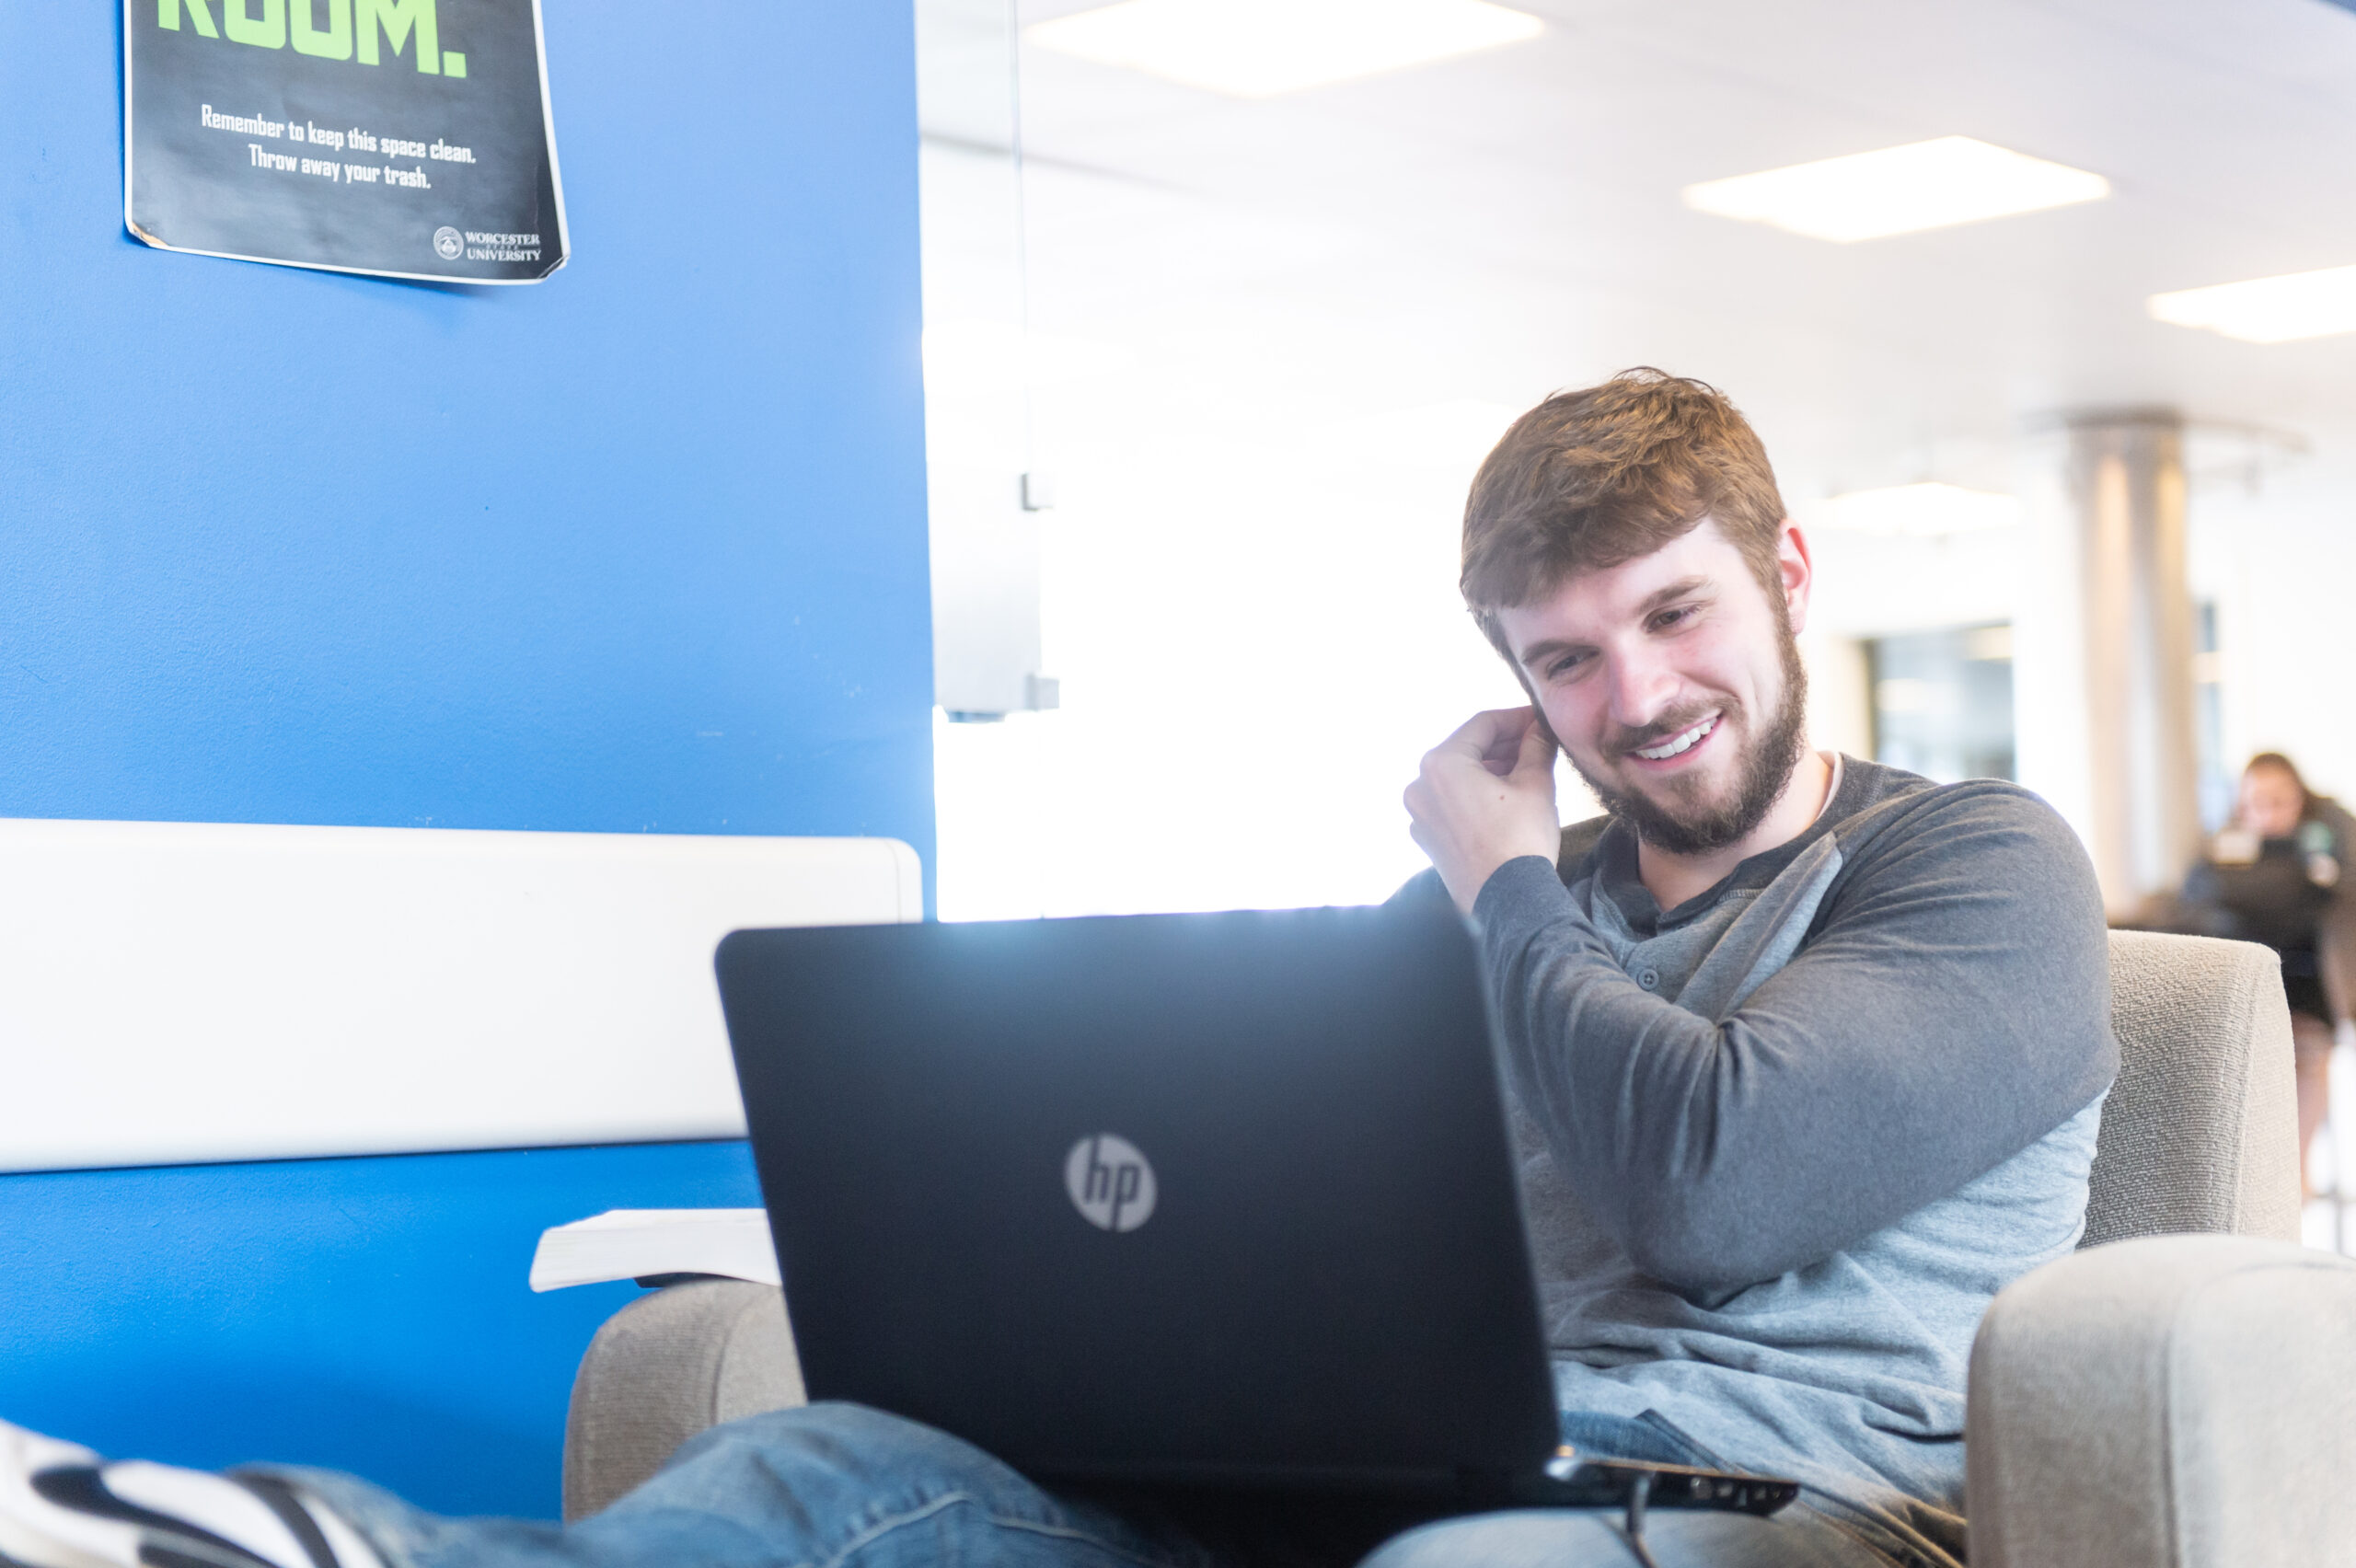 A Worcester State student smiling while looking at their laptop in a shared study lounge